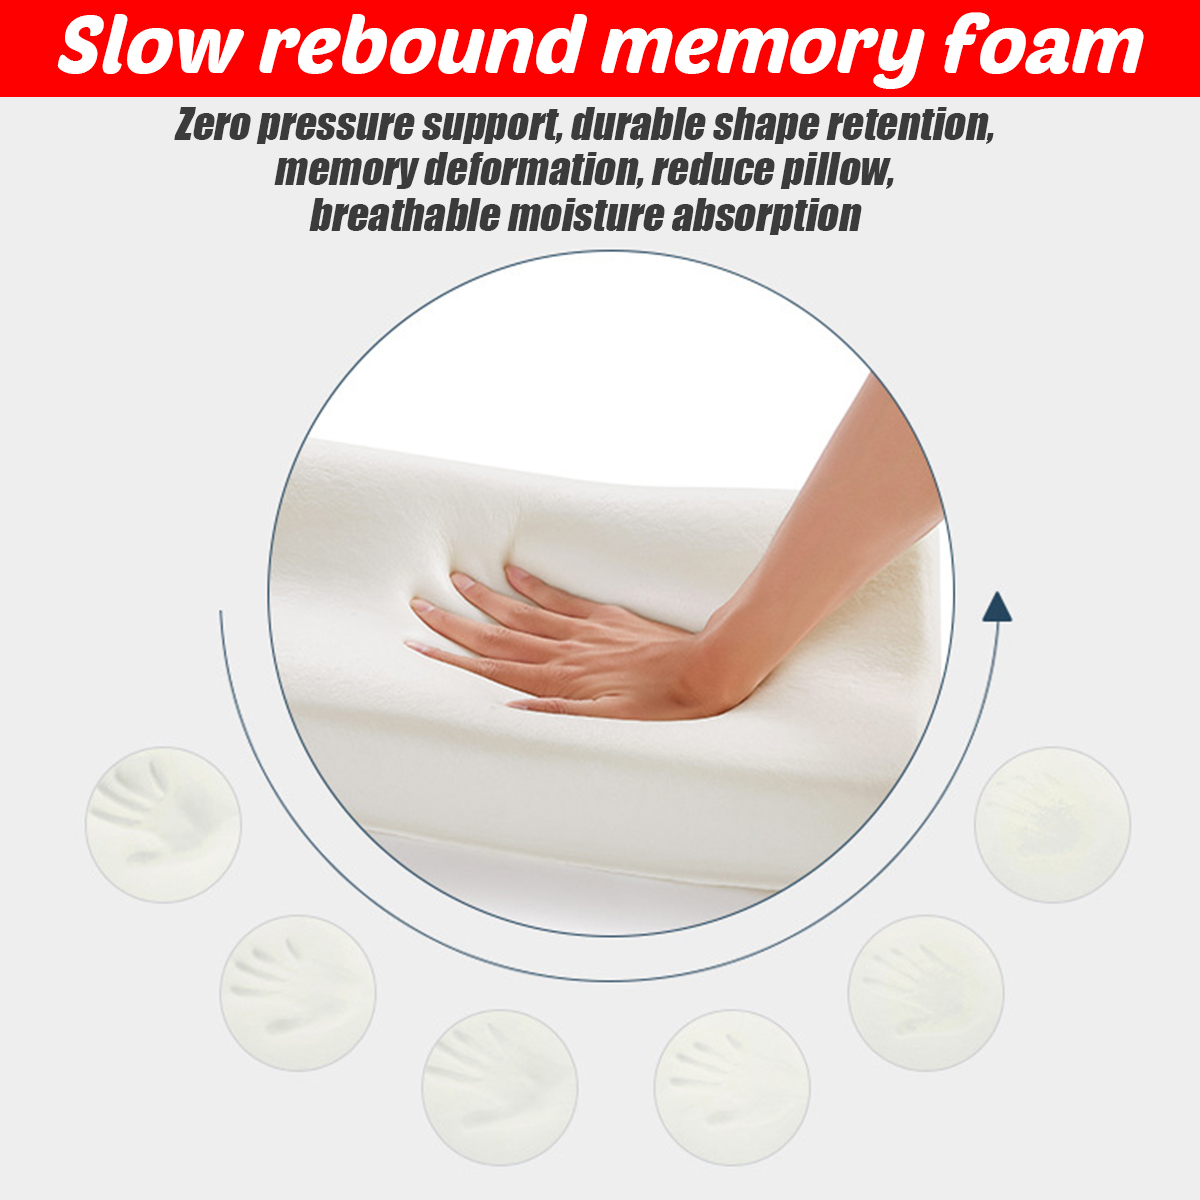 Bamboo-Memory-Foam-Pillow-Reversible-Pillow-Orthopedic-Slow-Rebound-Cervical-Neck-Pain-Relief-1813962-4